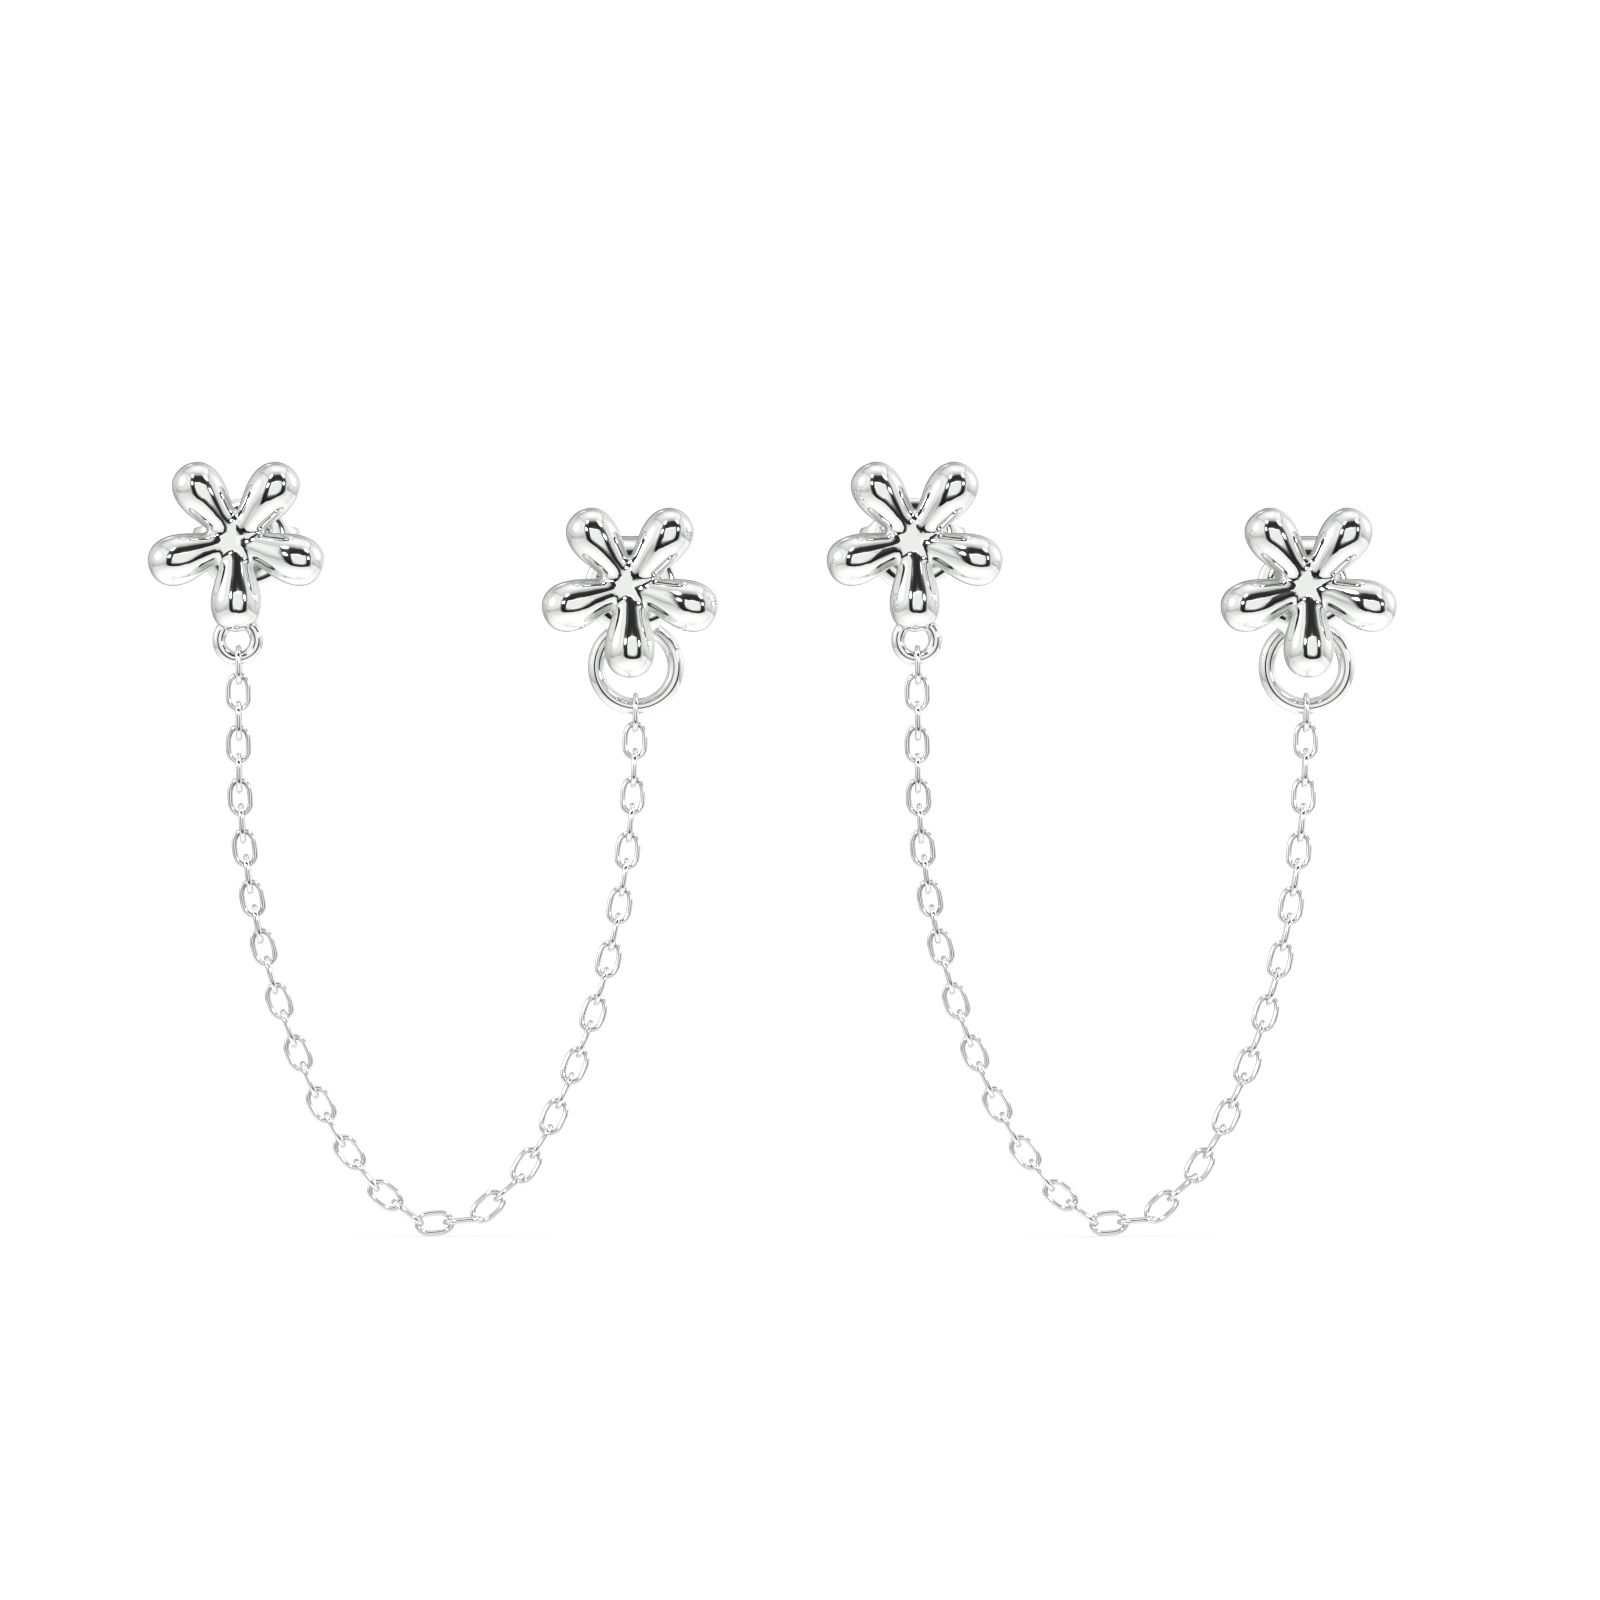 Dainty flower connector - 3 in 1